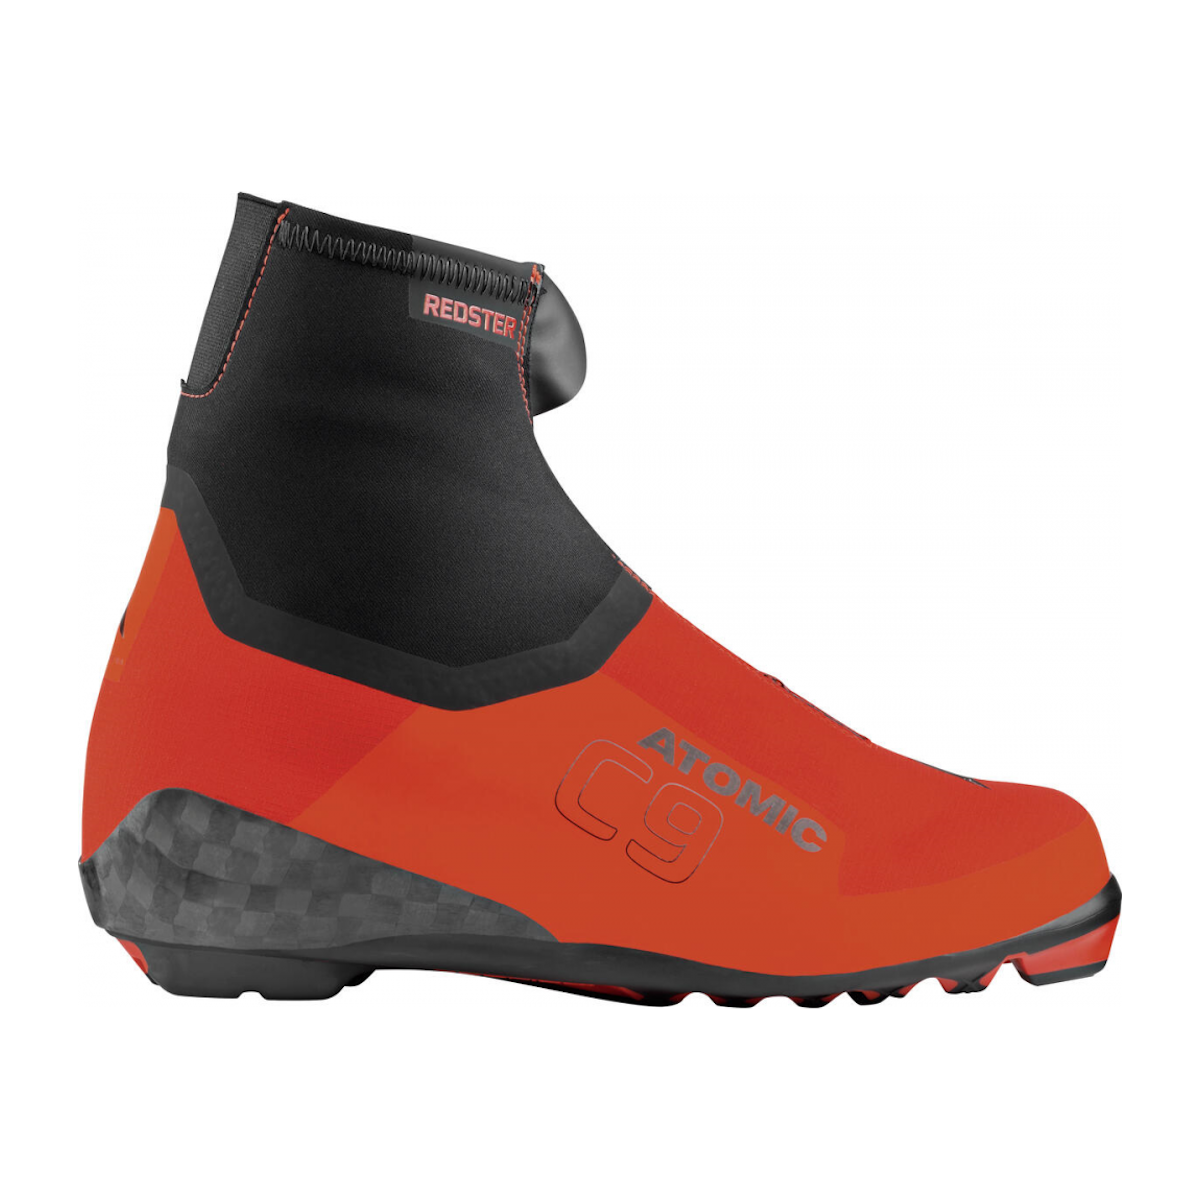 ATOMIC REDSTER C9 PROLINK classic nordic boots - red/black